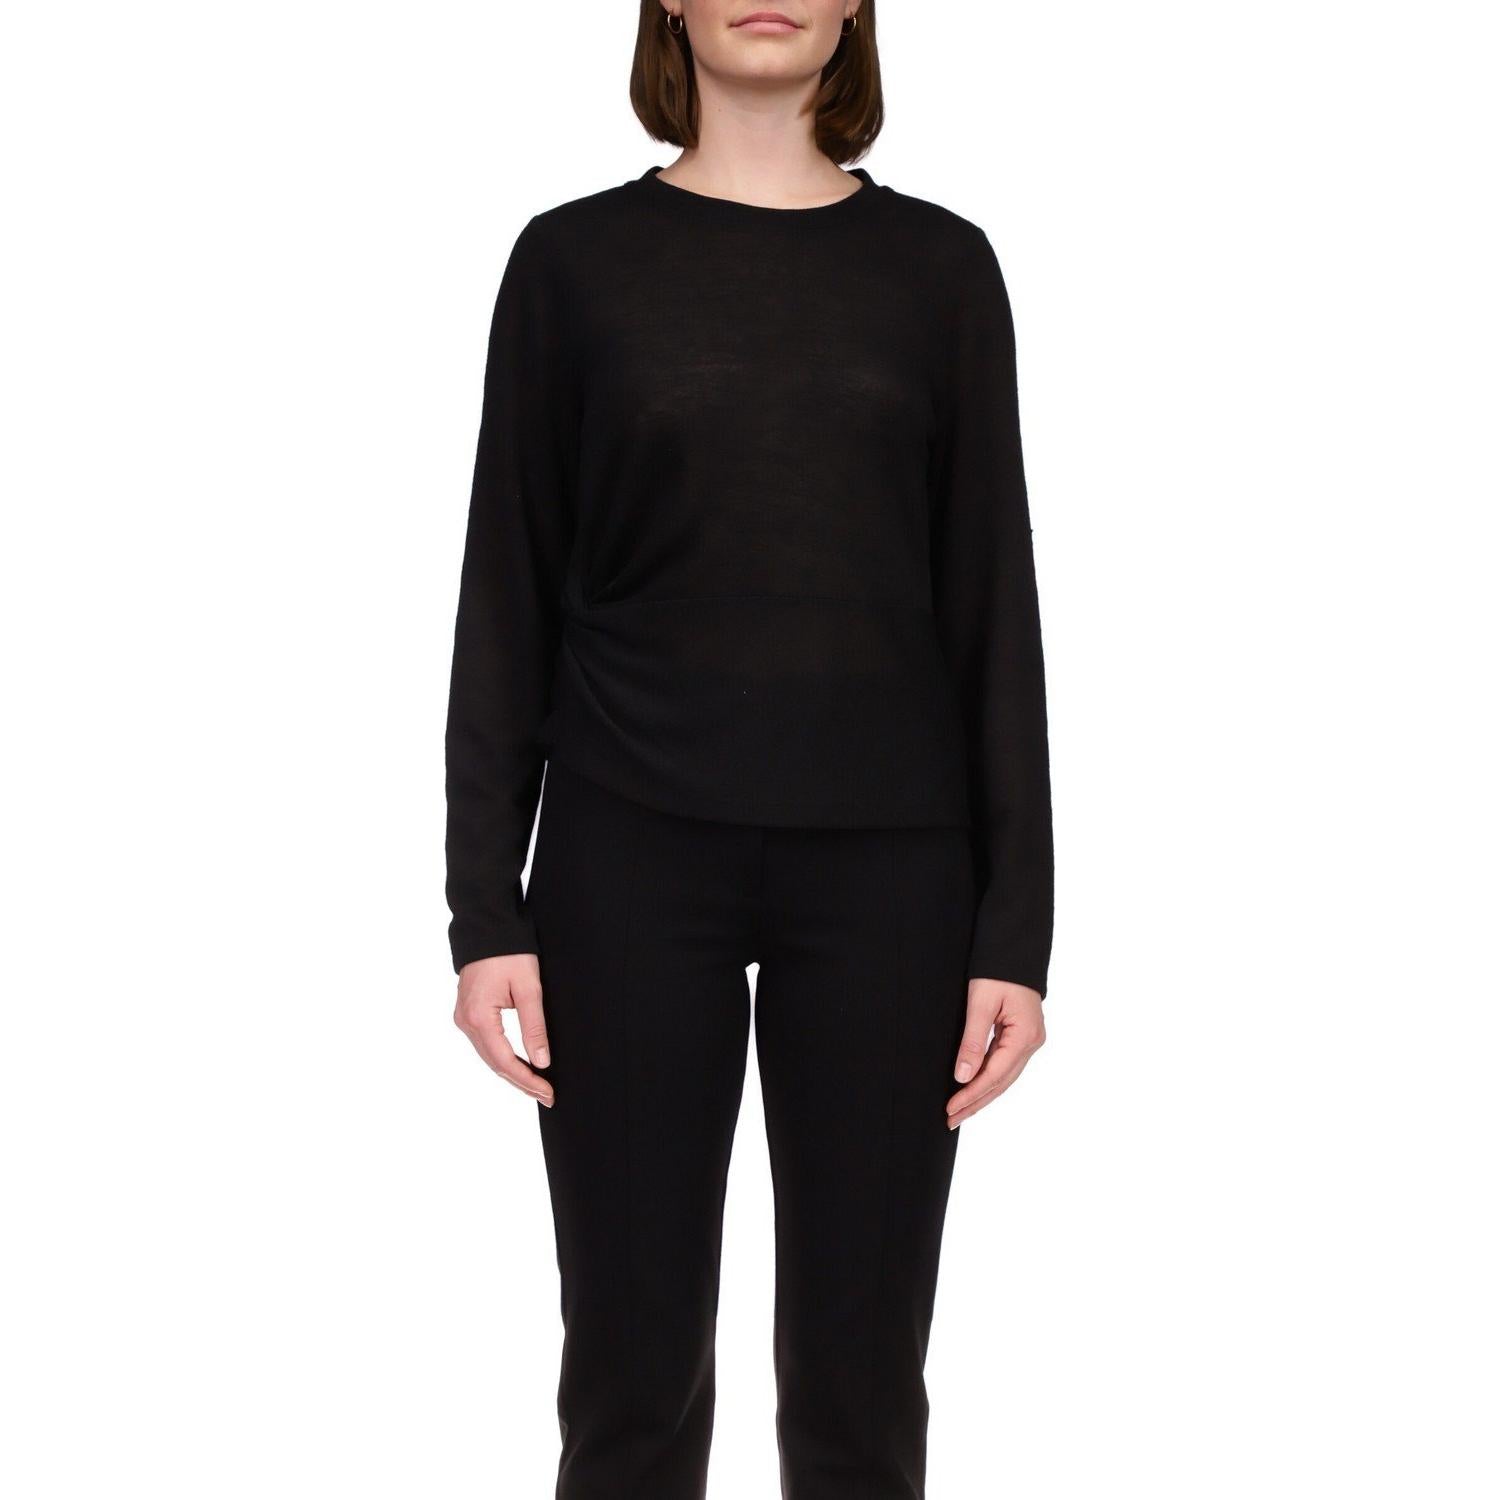 Sanctuary - Knot Your Business Top in Black-SQ7715085